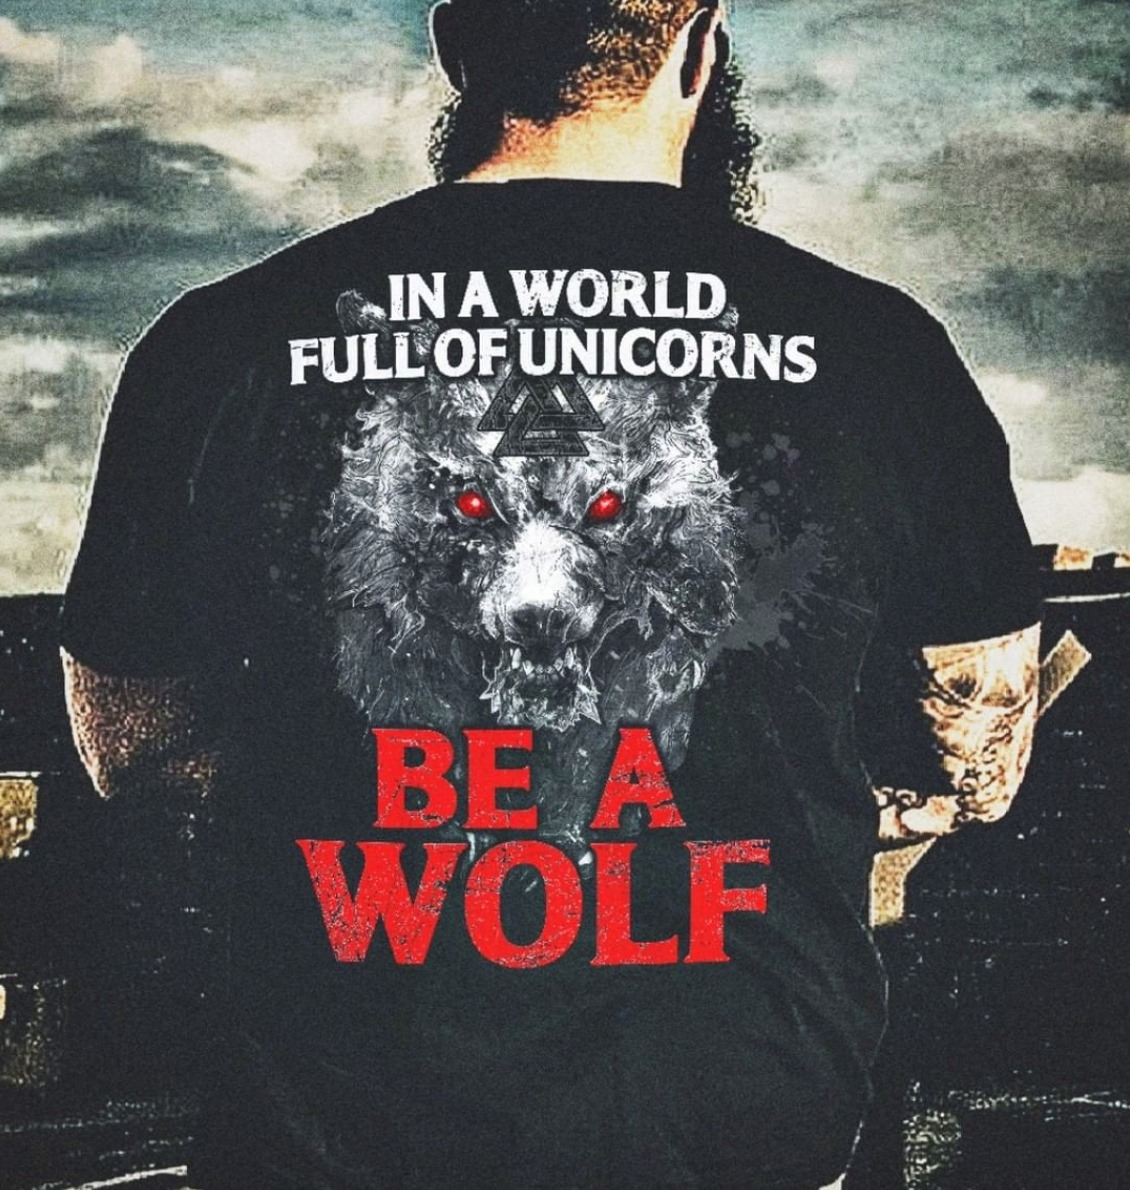 In a world full of unicorns be a wolf